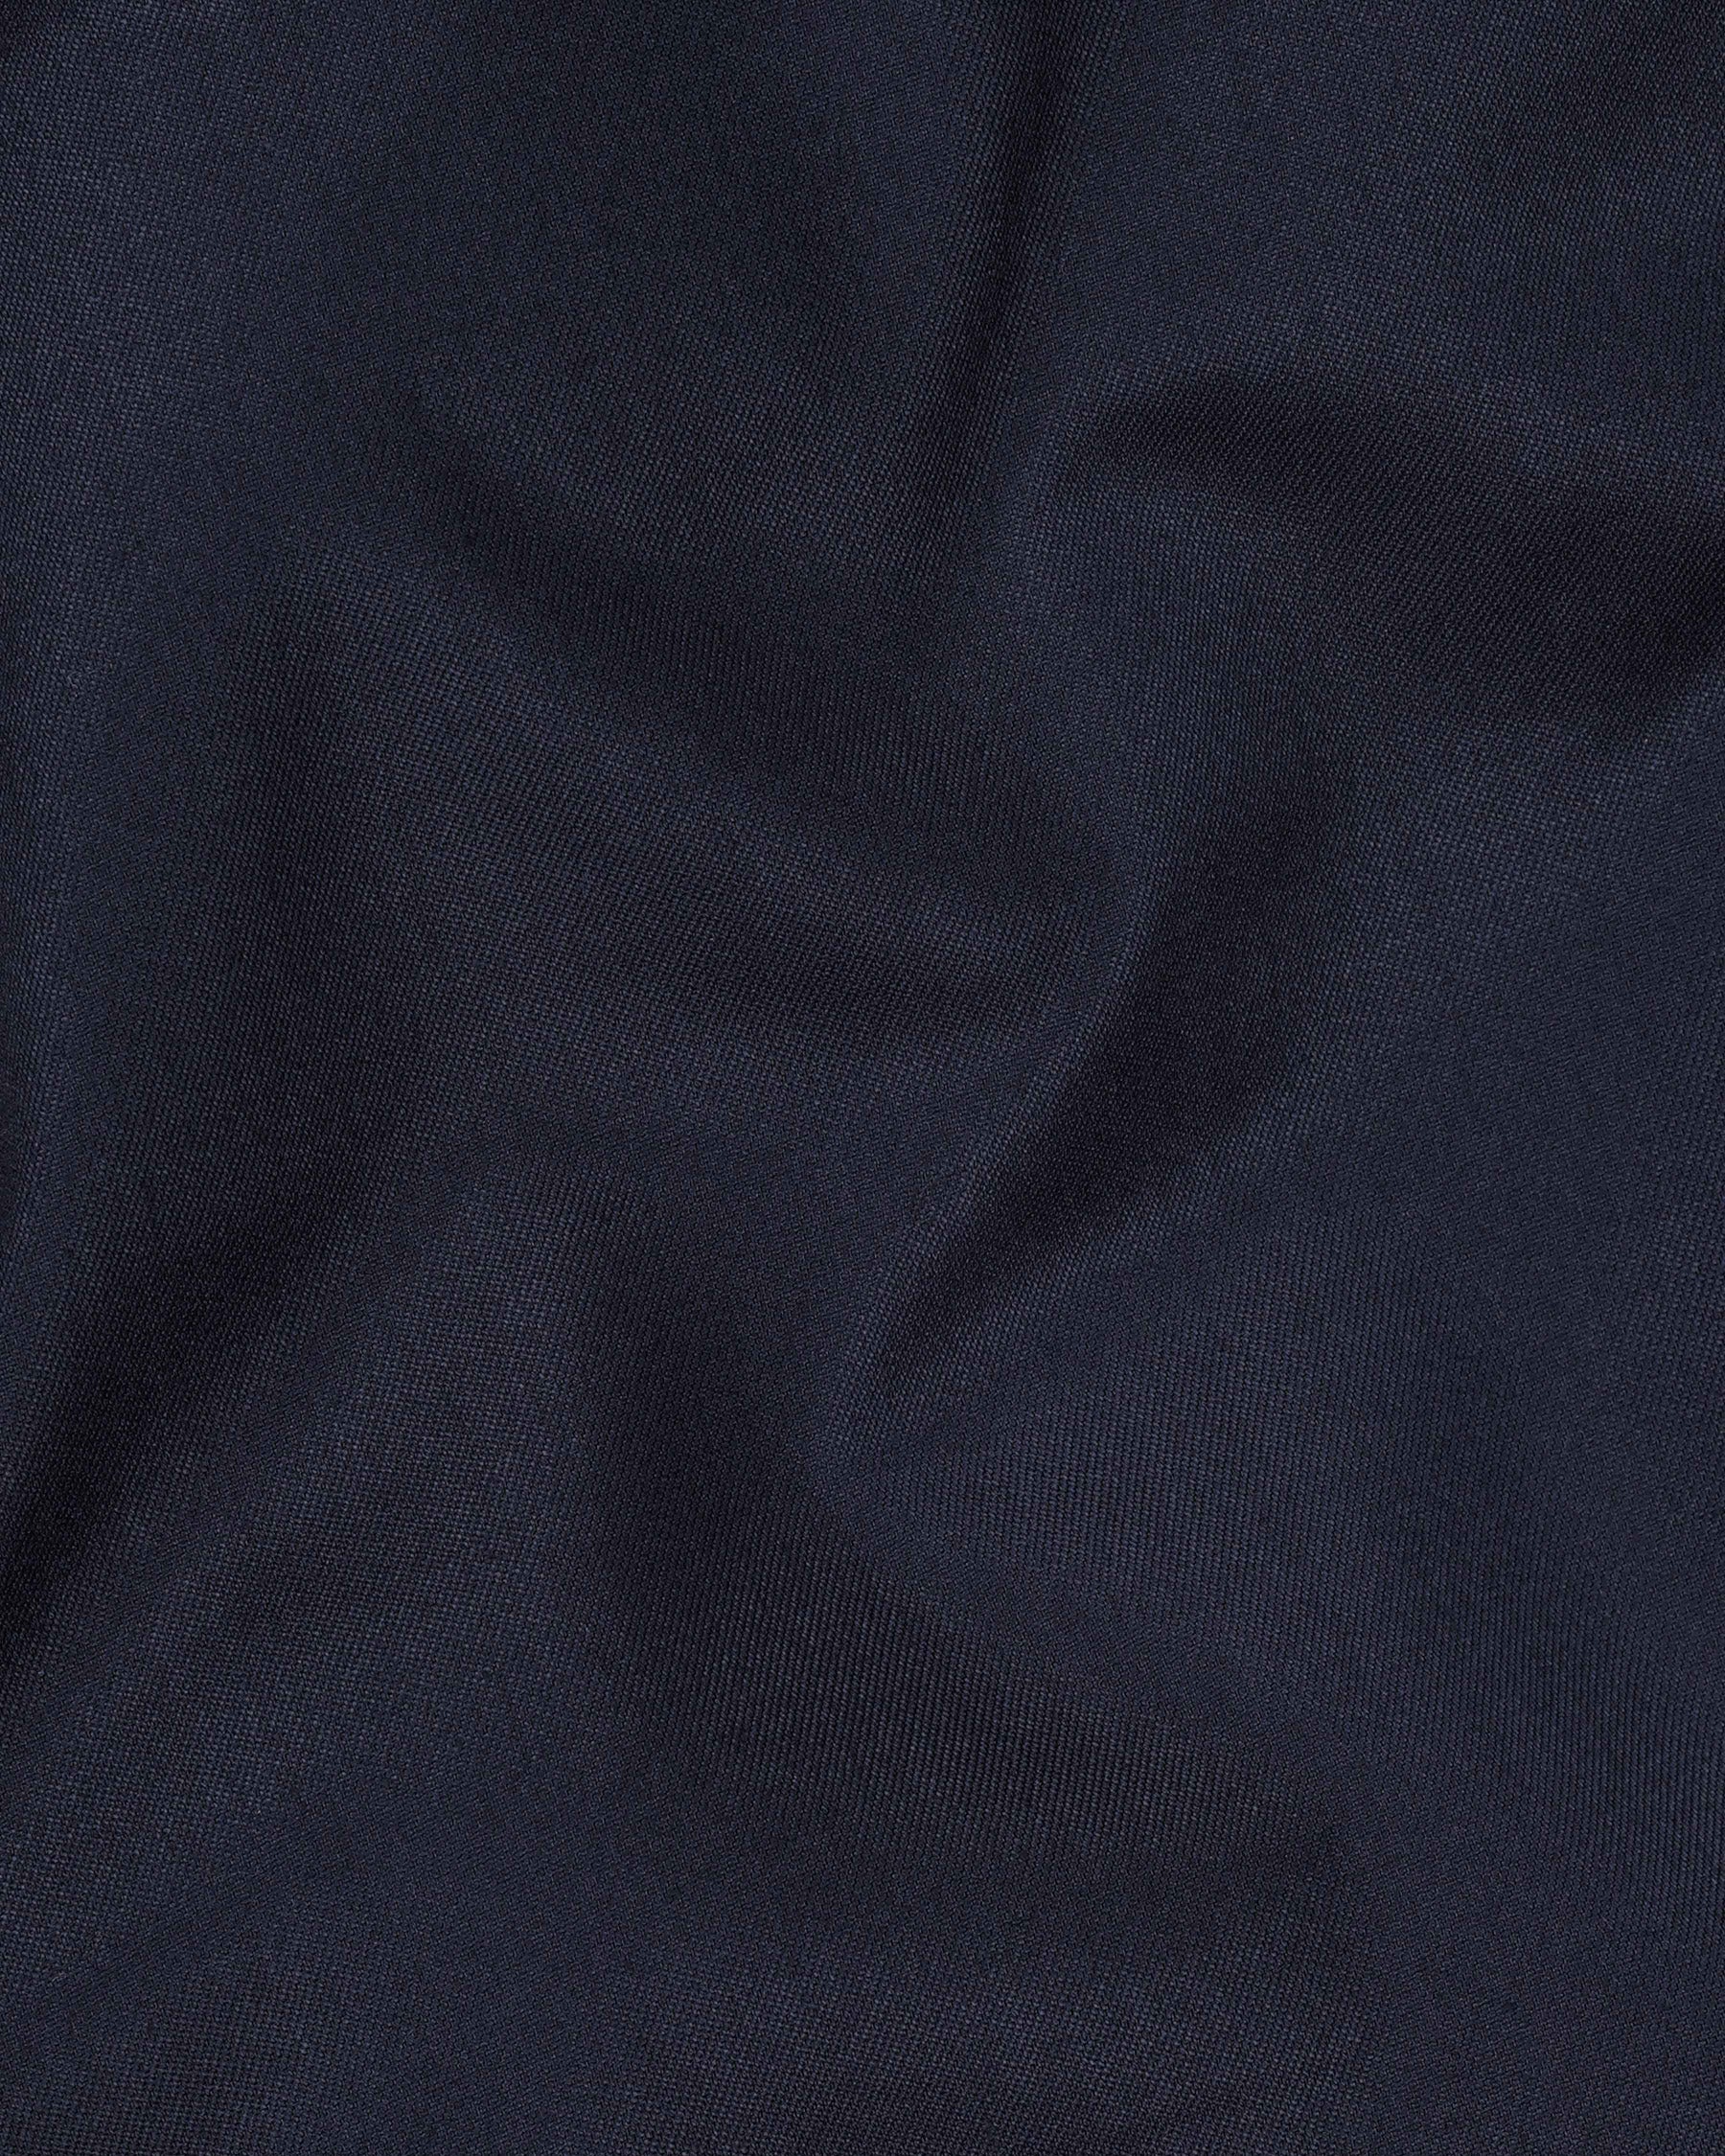 Firefly Navy Blue Double-Breasted Suit